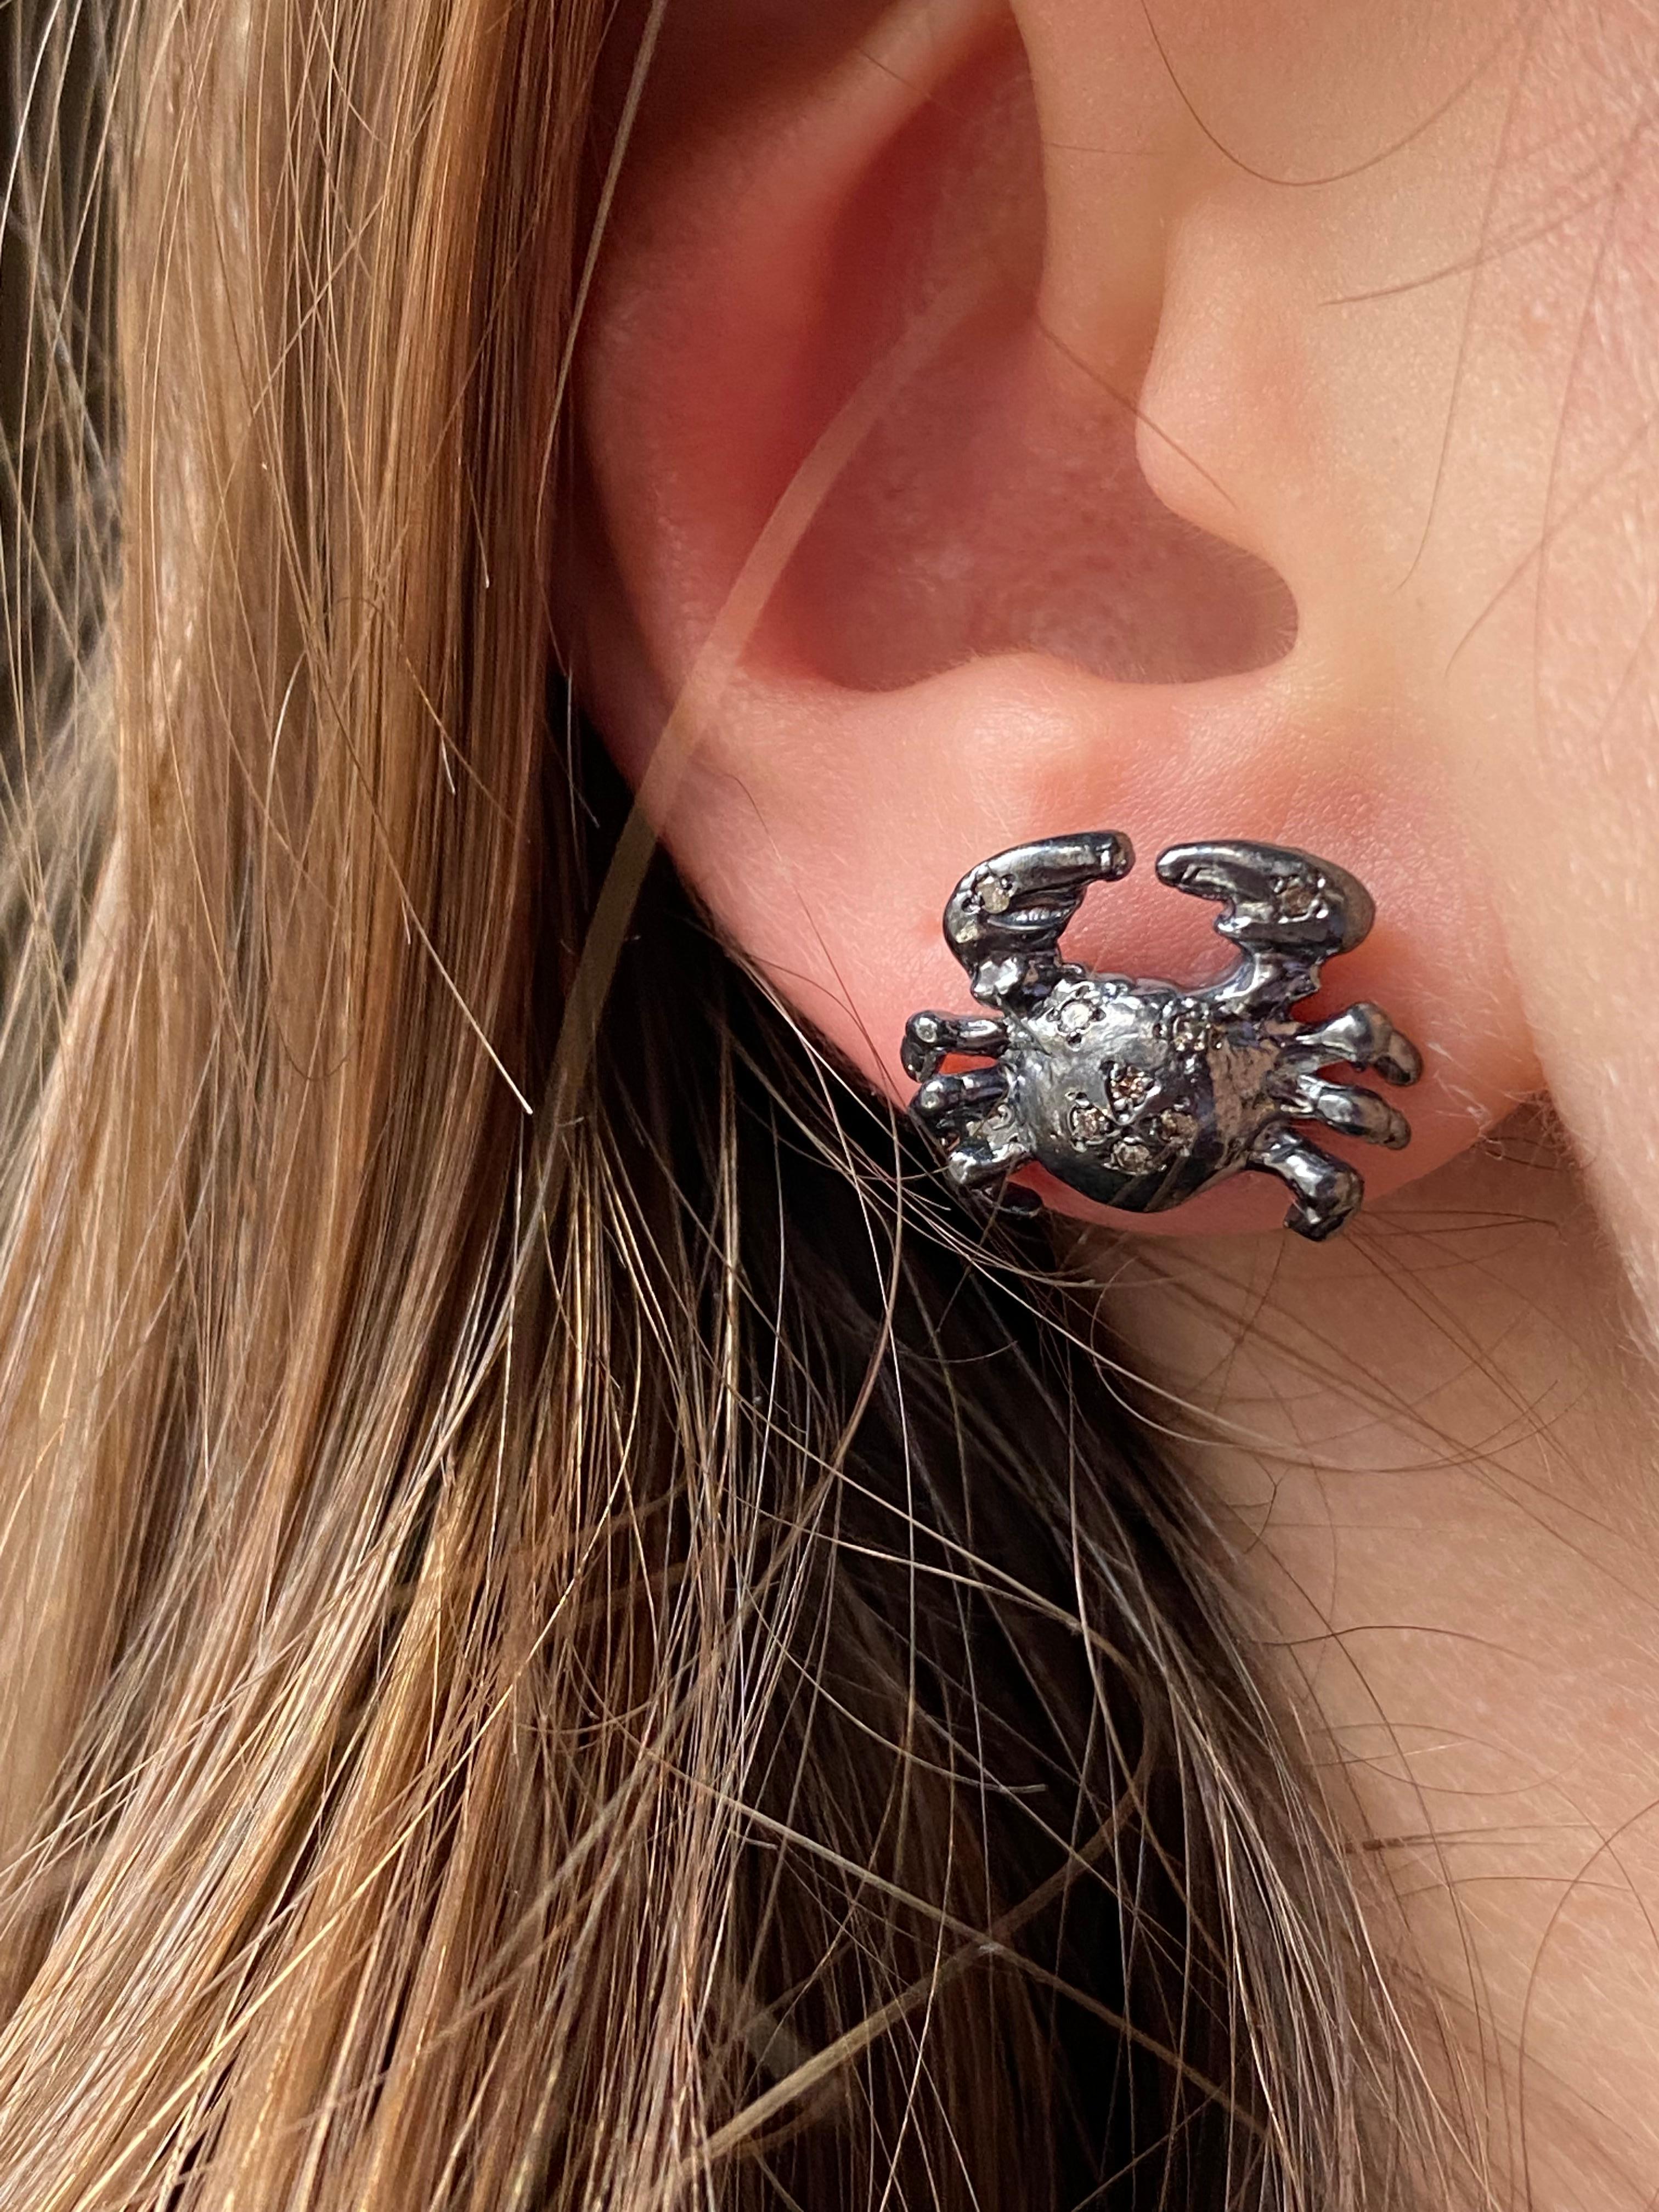 Rock style Cancer Zodiac Sign Burnished stud earrings handcrafted in burnished sterling silver and embellished with beautiful Brown Diamonds. 
These earrings are Inspired by the cancer zodiac sign of people born in july. Cancer people are really